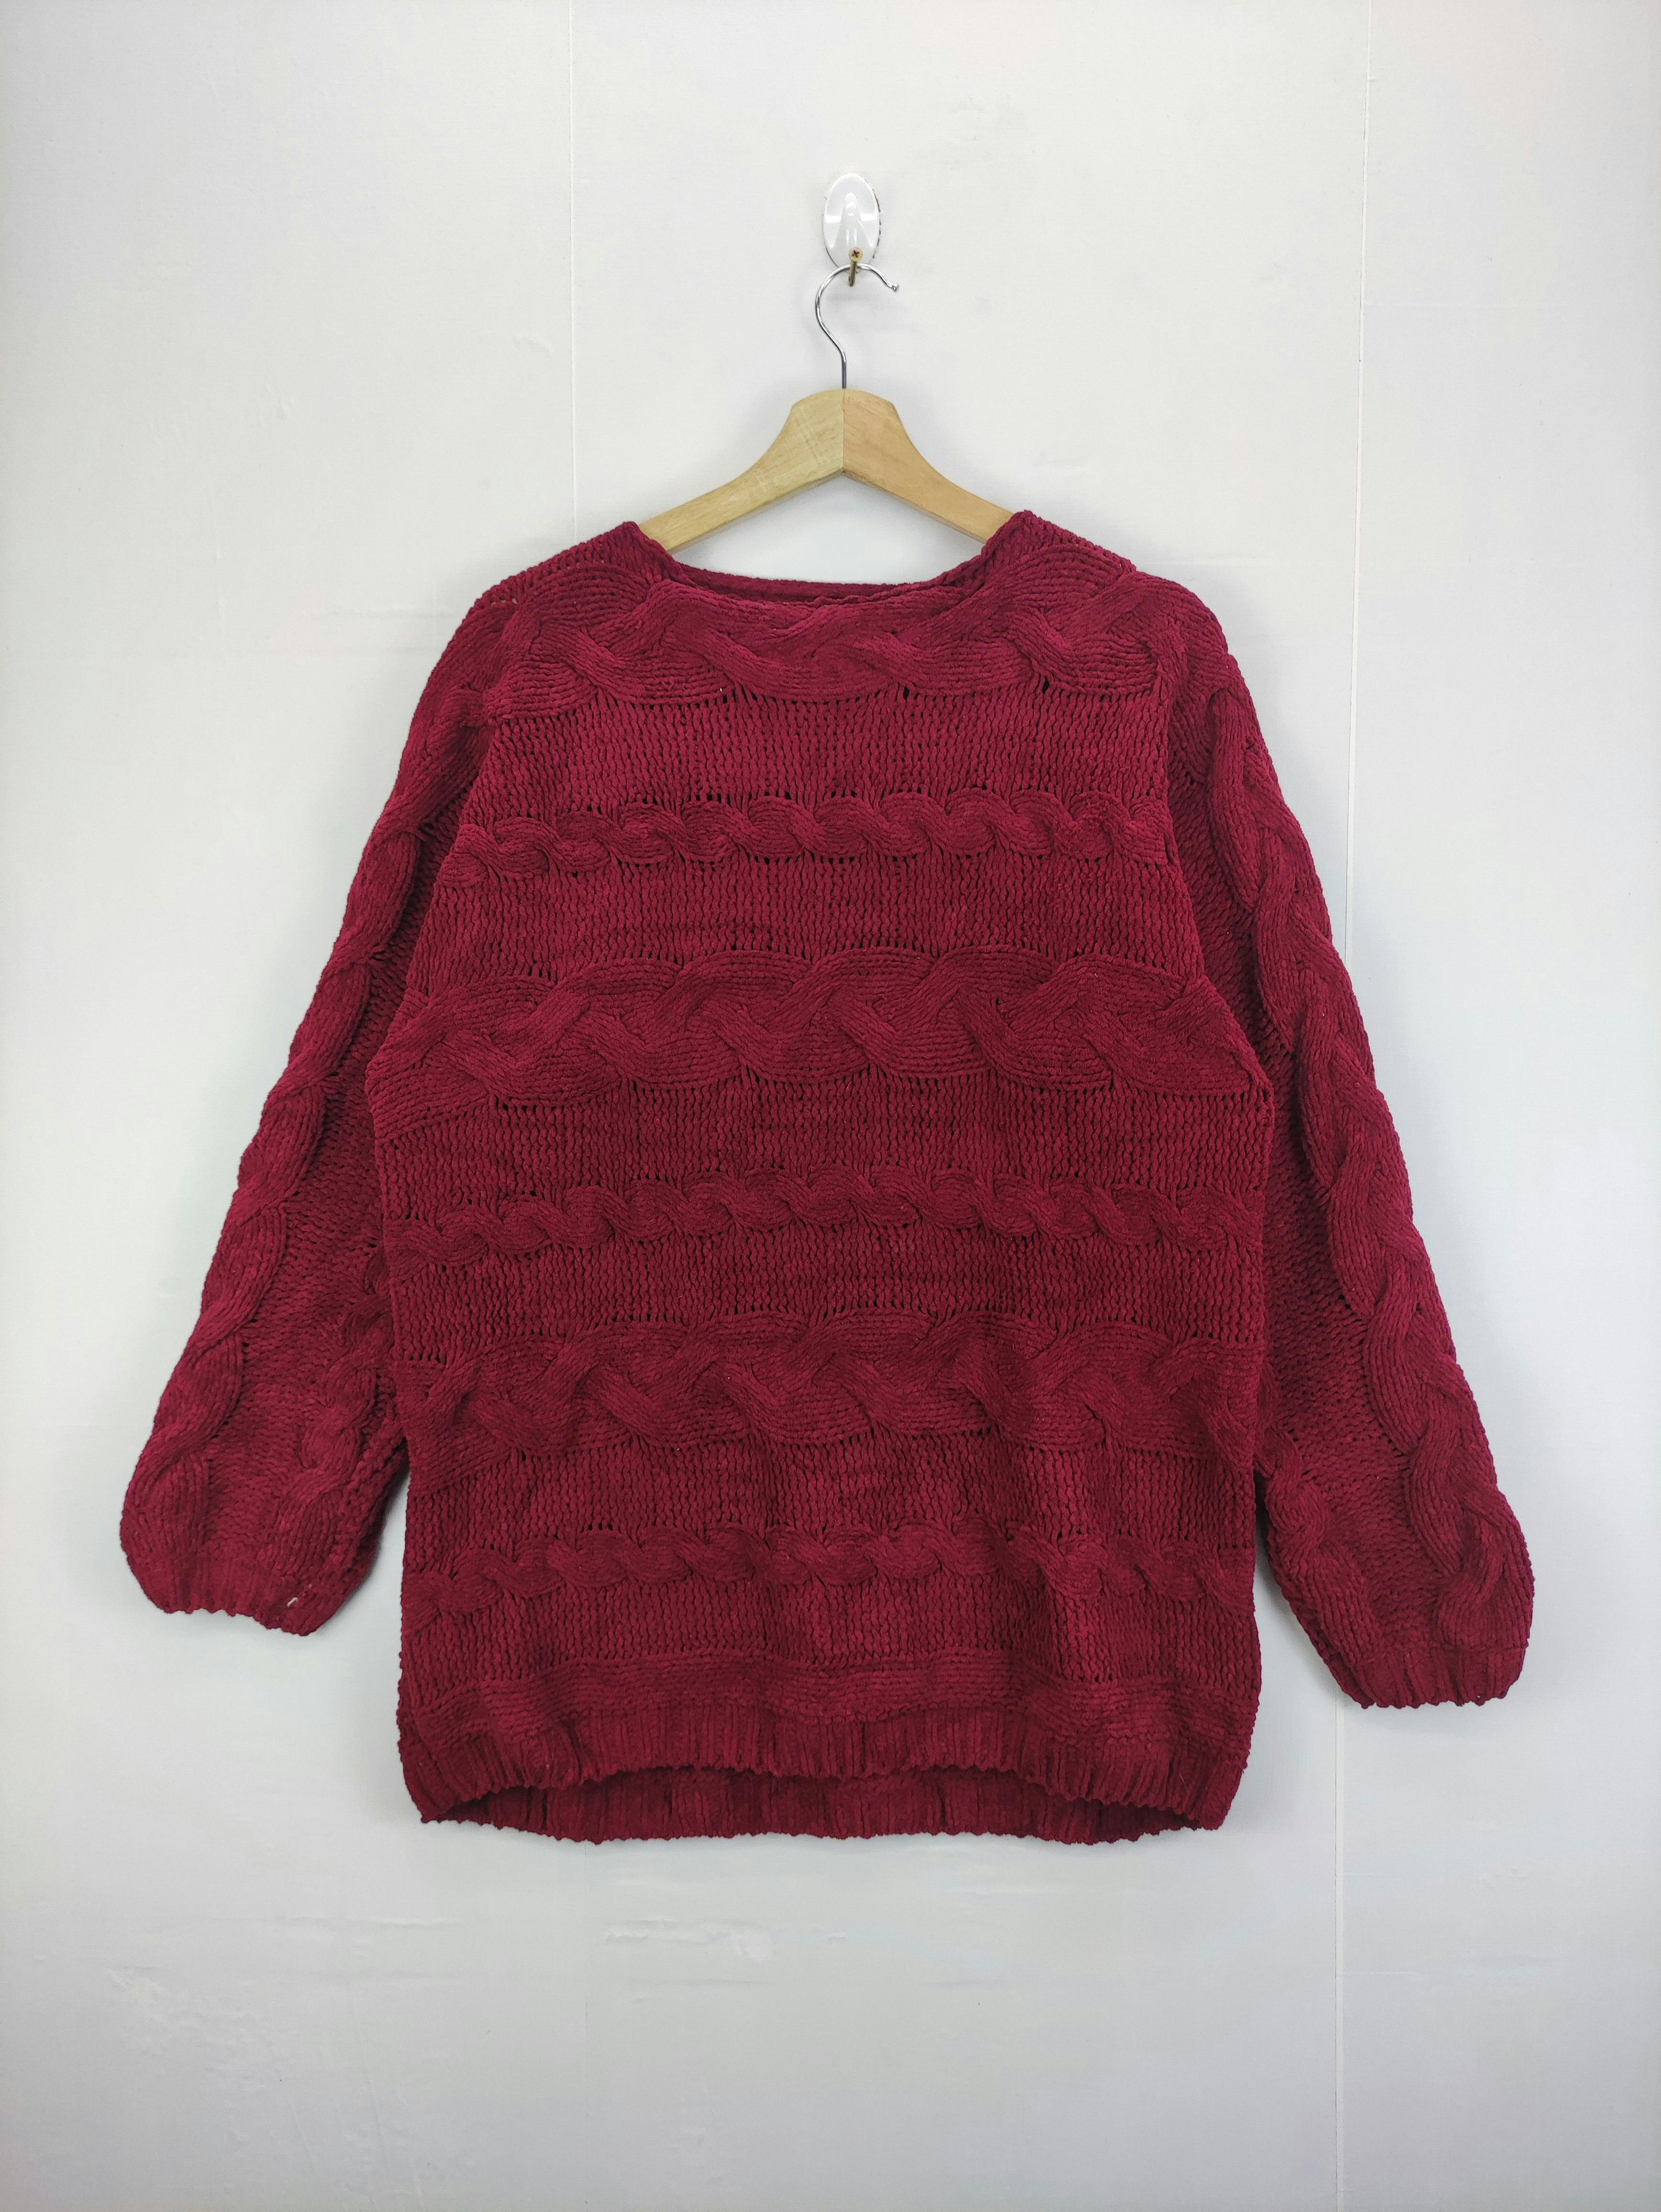 Vintage Cable Knit Sweater By Furry rate - 1